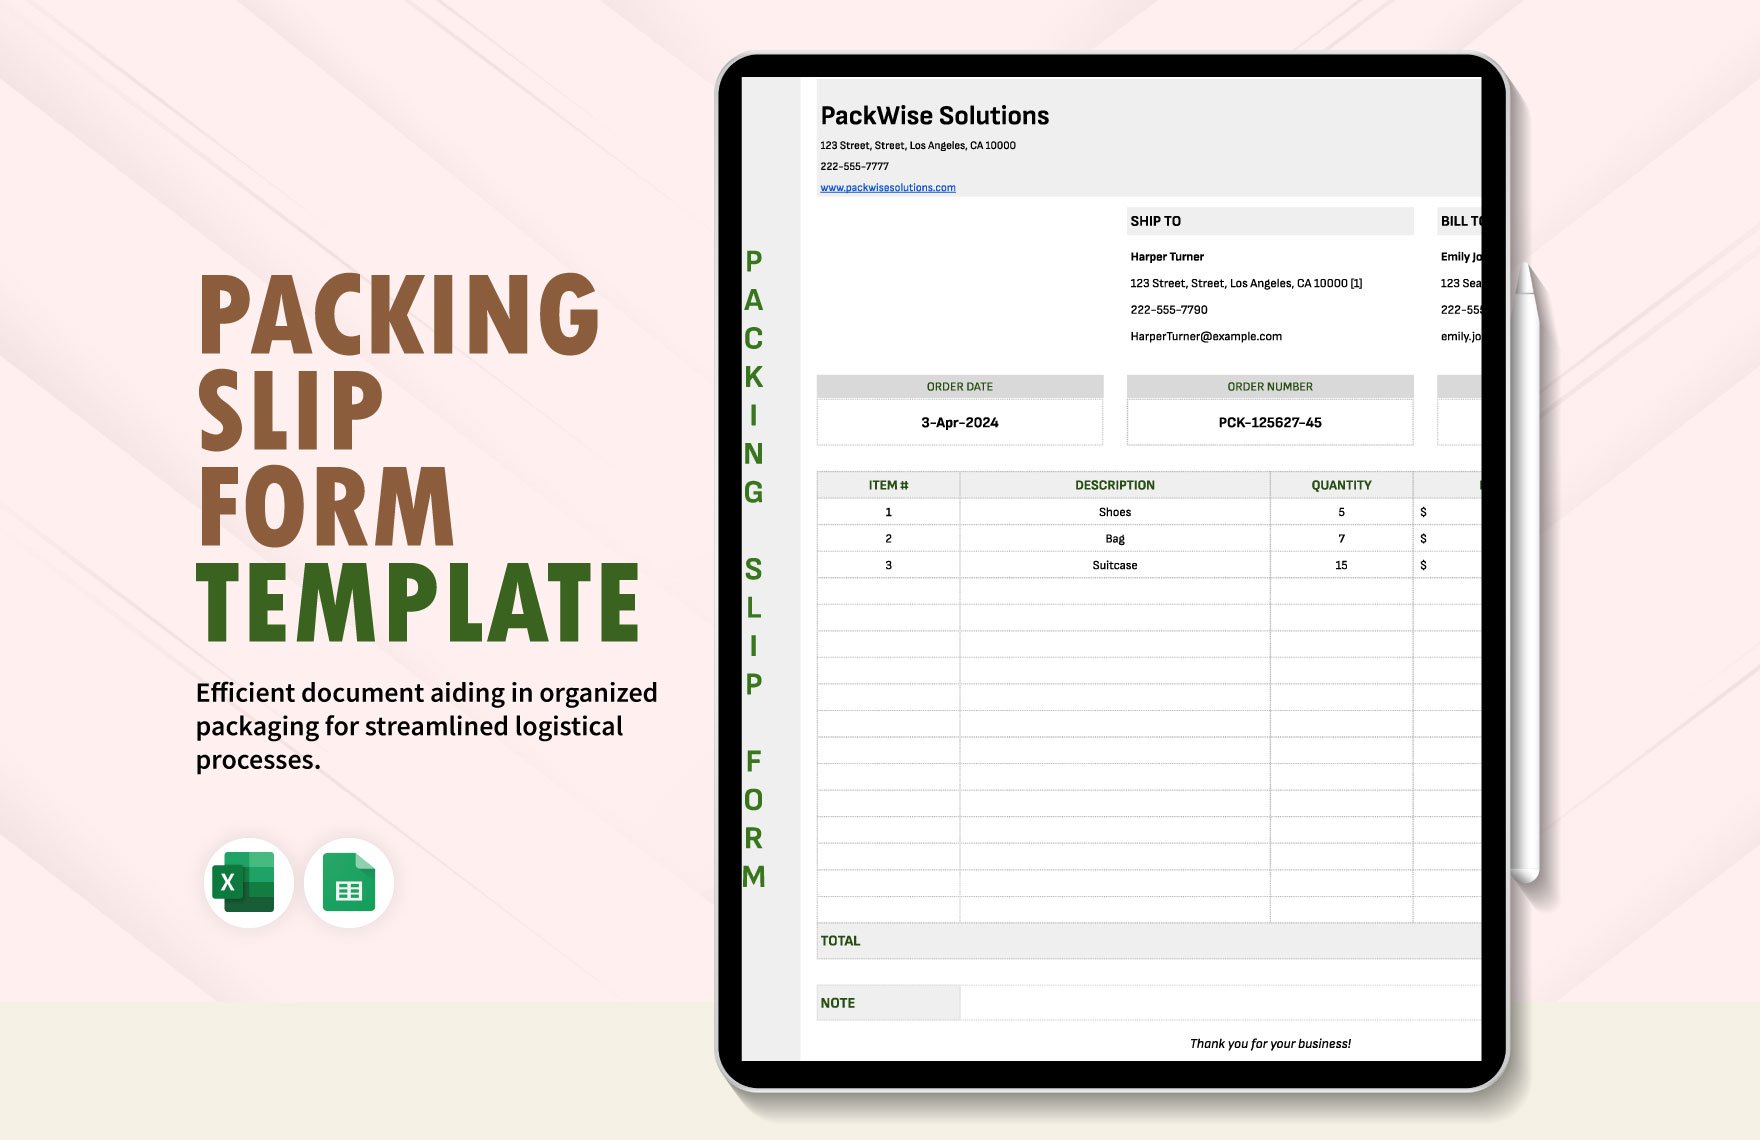 Packing Slip Form Template in Excel, Google Sheets